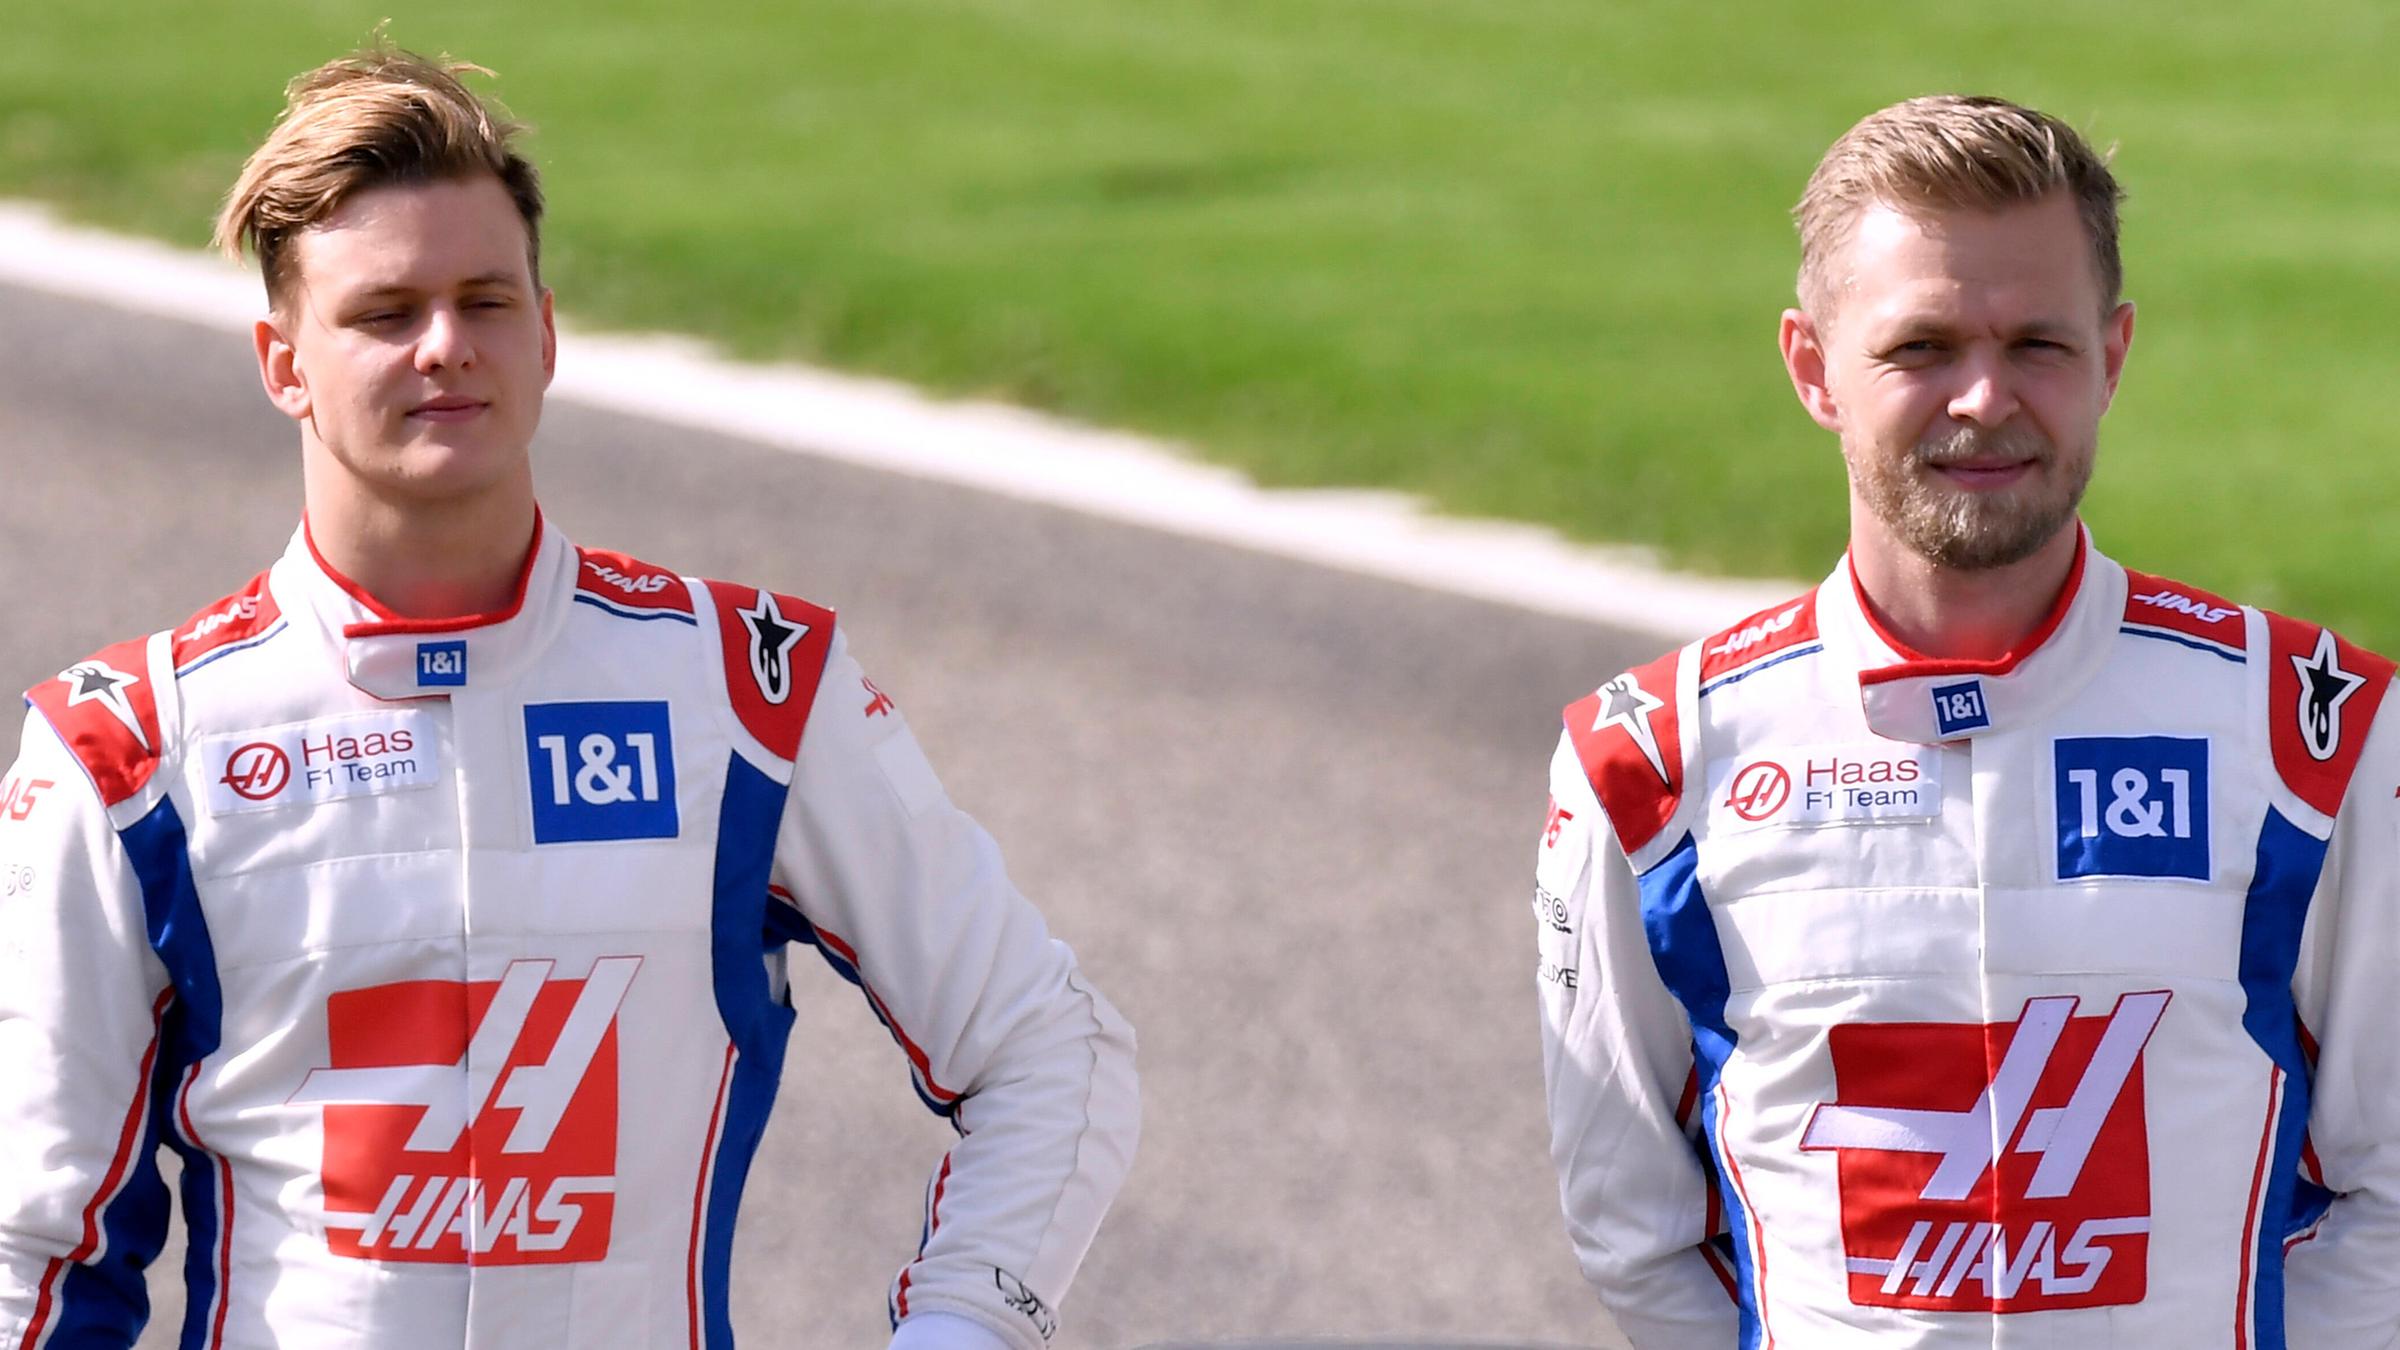 Mick Schumacher (left) and Kevin Magnussen, March 10, 2022.